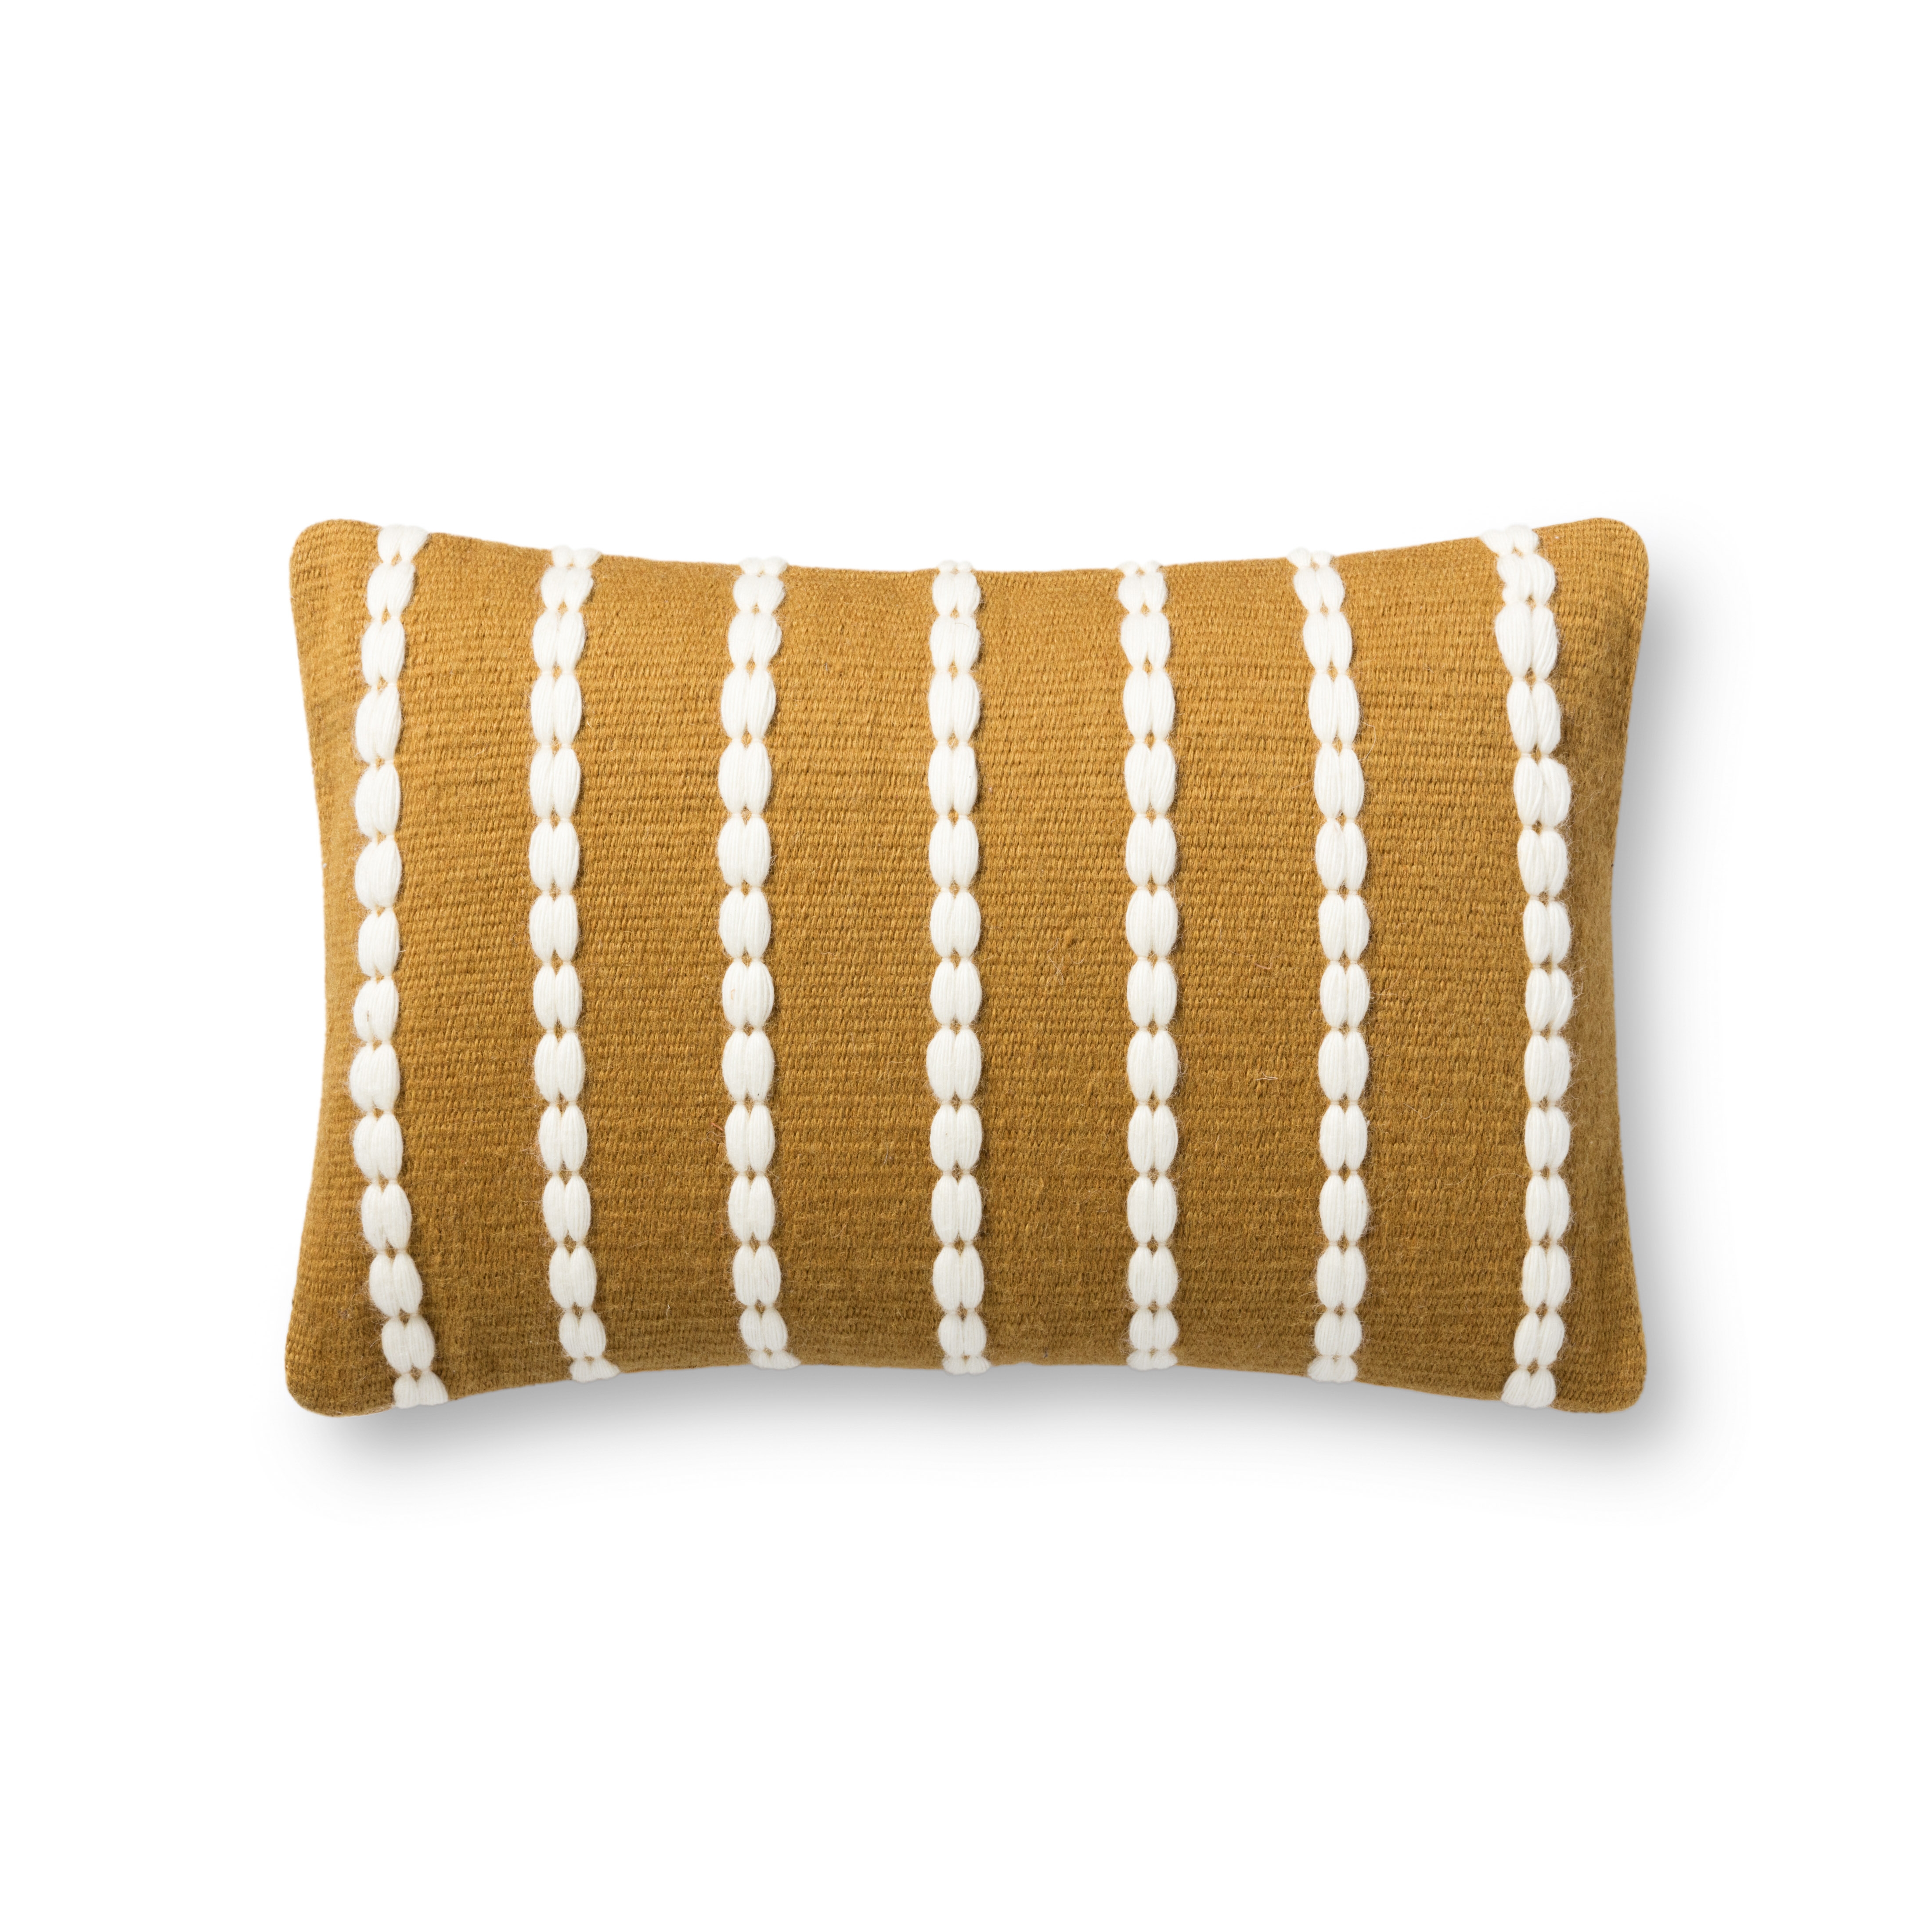 PILLOWS P1152 GOLD / IVORY 13" x 21" Cover Only - Image 0